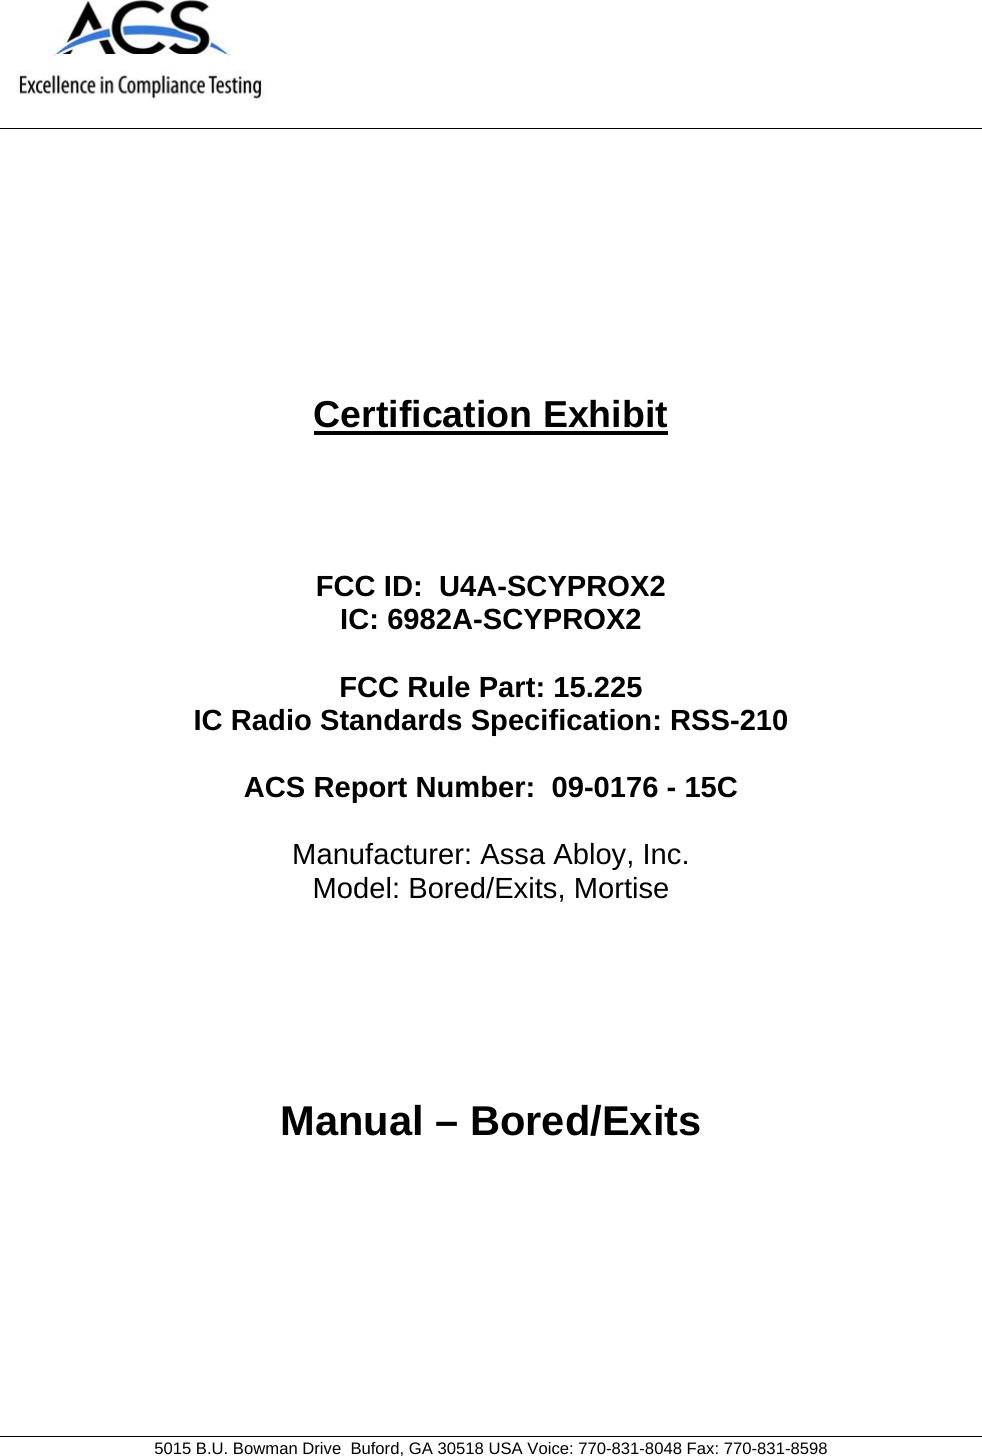     5015 B.U. Bowman Drive  Buford, GA 30518 USA Voice: 770-831-8048 Fax: 770-831-8598   Certification Exhibit     FCC ID:  U4A-SCYPROX2 IC: 6982A-SCYPROX2  FCC Rule Part: 15.225 IC Radio Standards Specification: RSS-210  ACS Report Number:  09-0176 - 15C   Manufacturer: Assa Abloy, Inc. Model: Bored/Exits, Mortise     Manual – Bored/Exits  